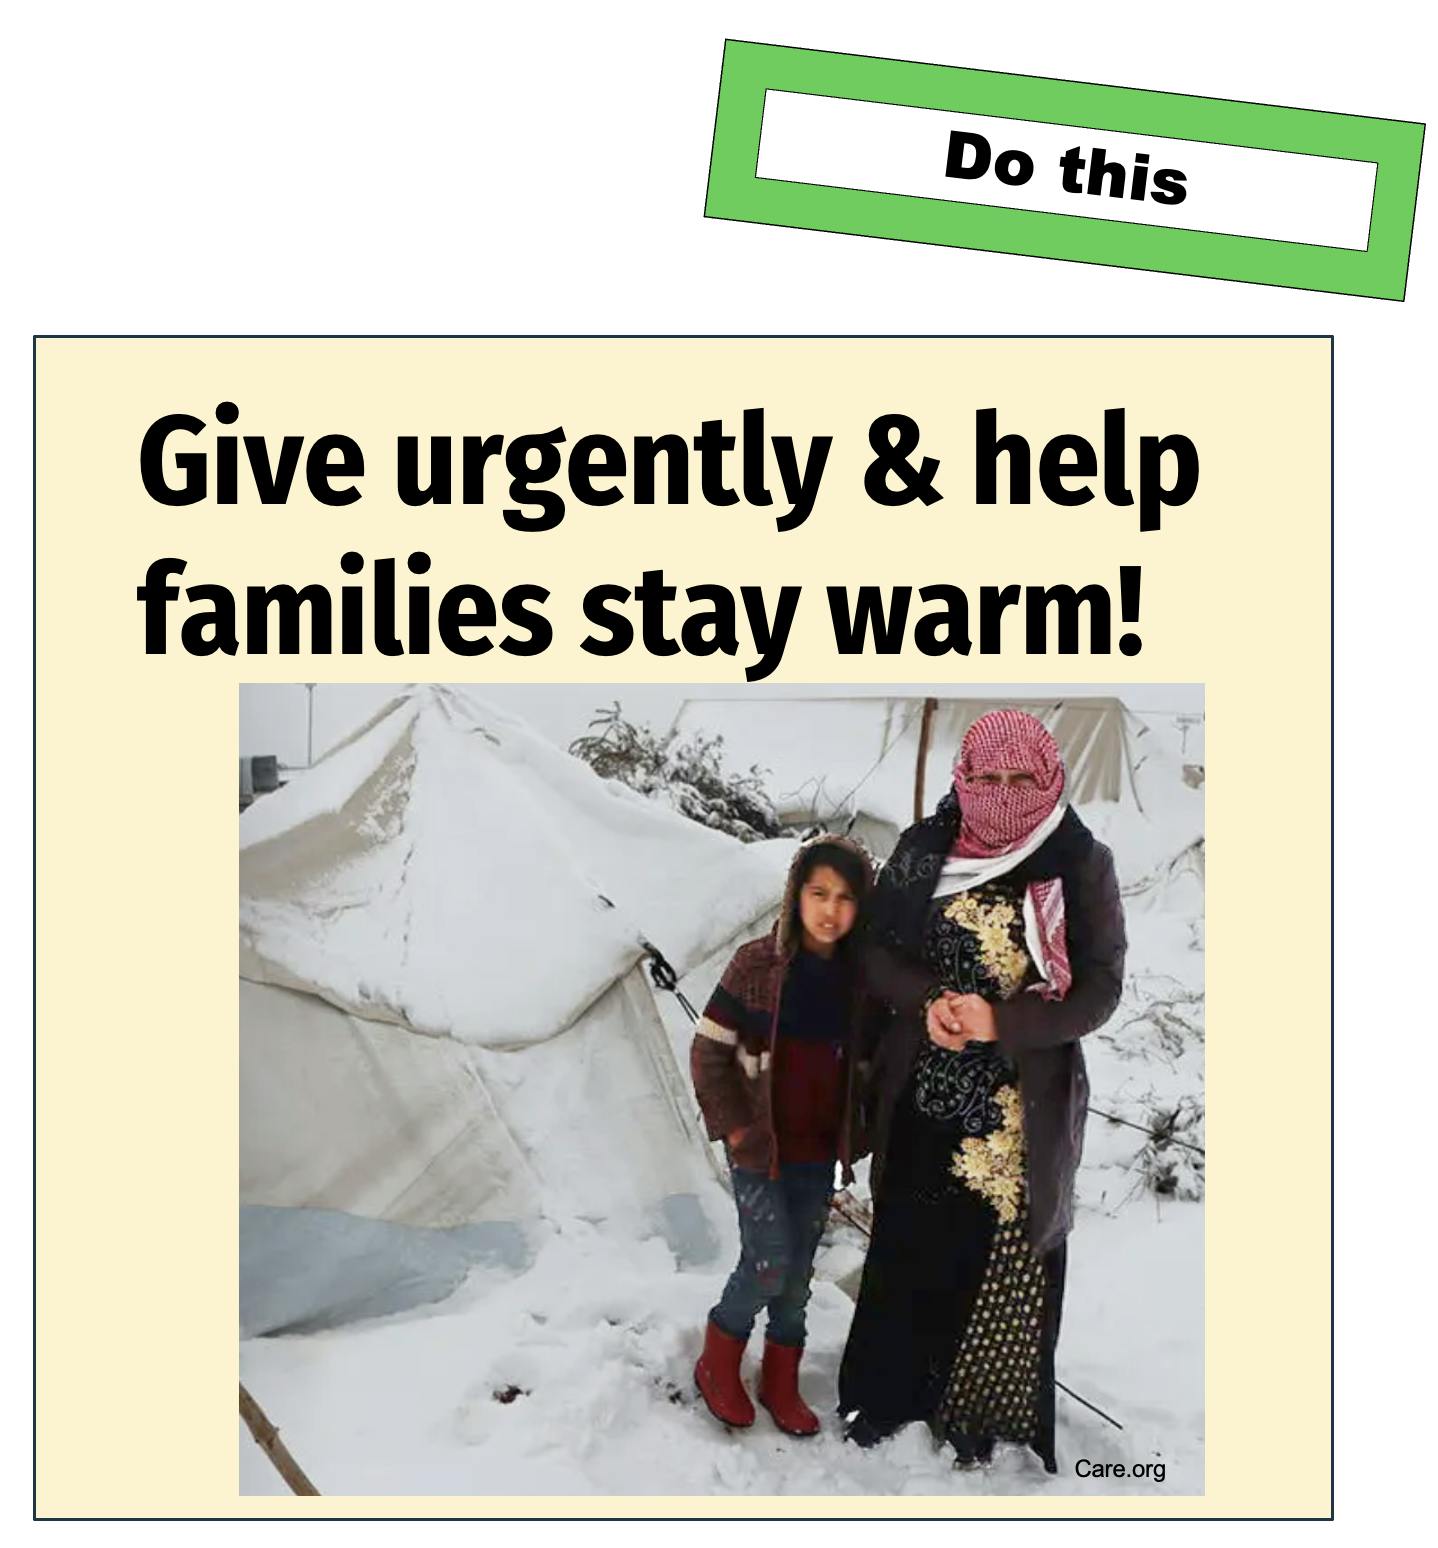 image of a mother and daughter in light clothing, surrounded by cold and snow, a tent in the background, neither of them smiling, with the caption "Give urgently & help families stay warm!""